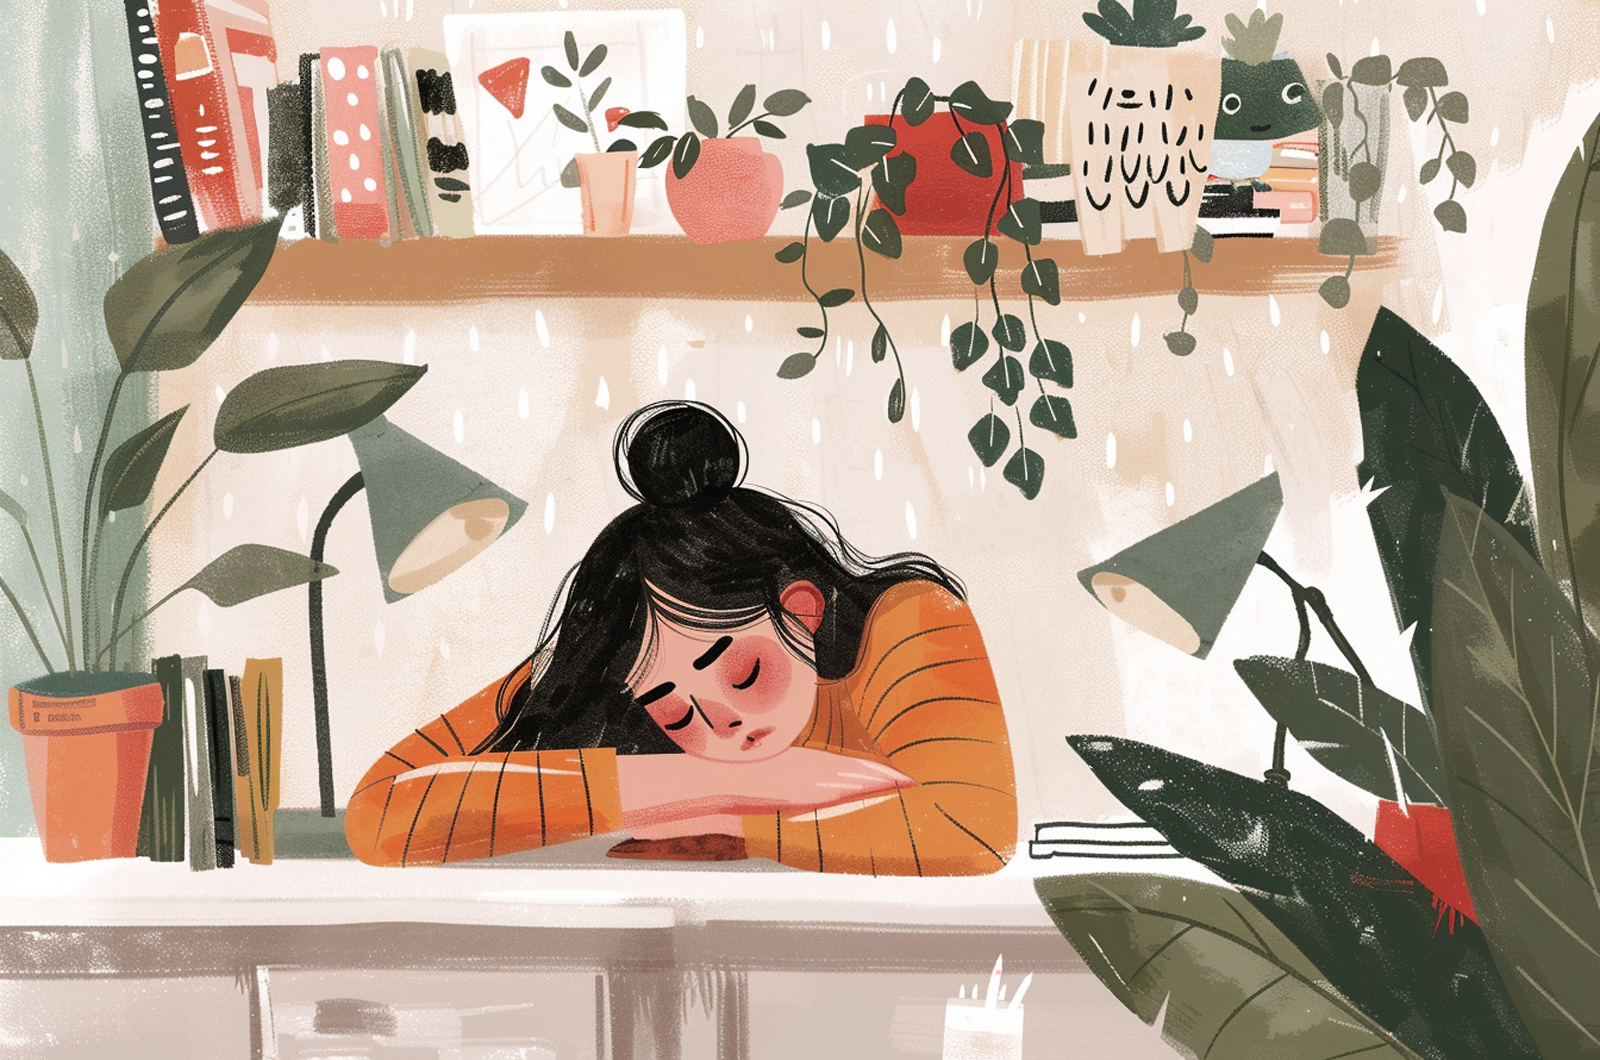 A lady is sleeping on the table surrounded by books and small trees